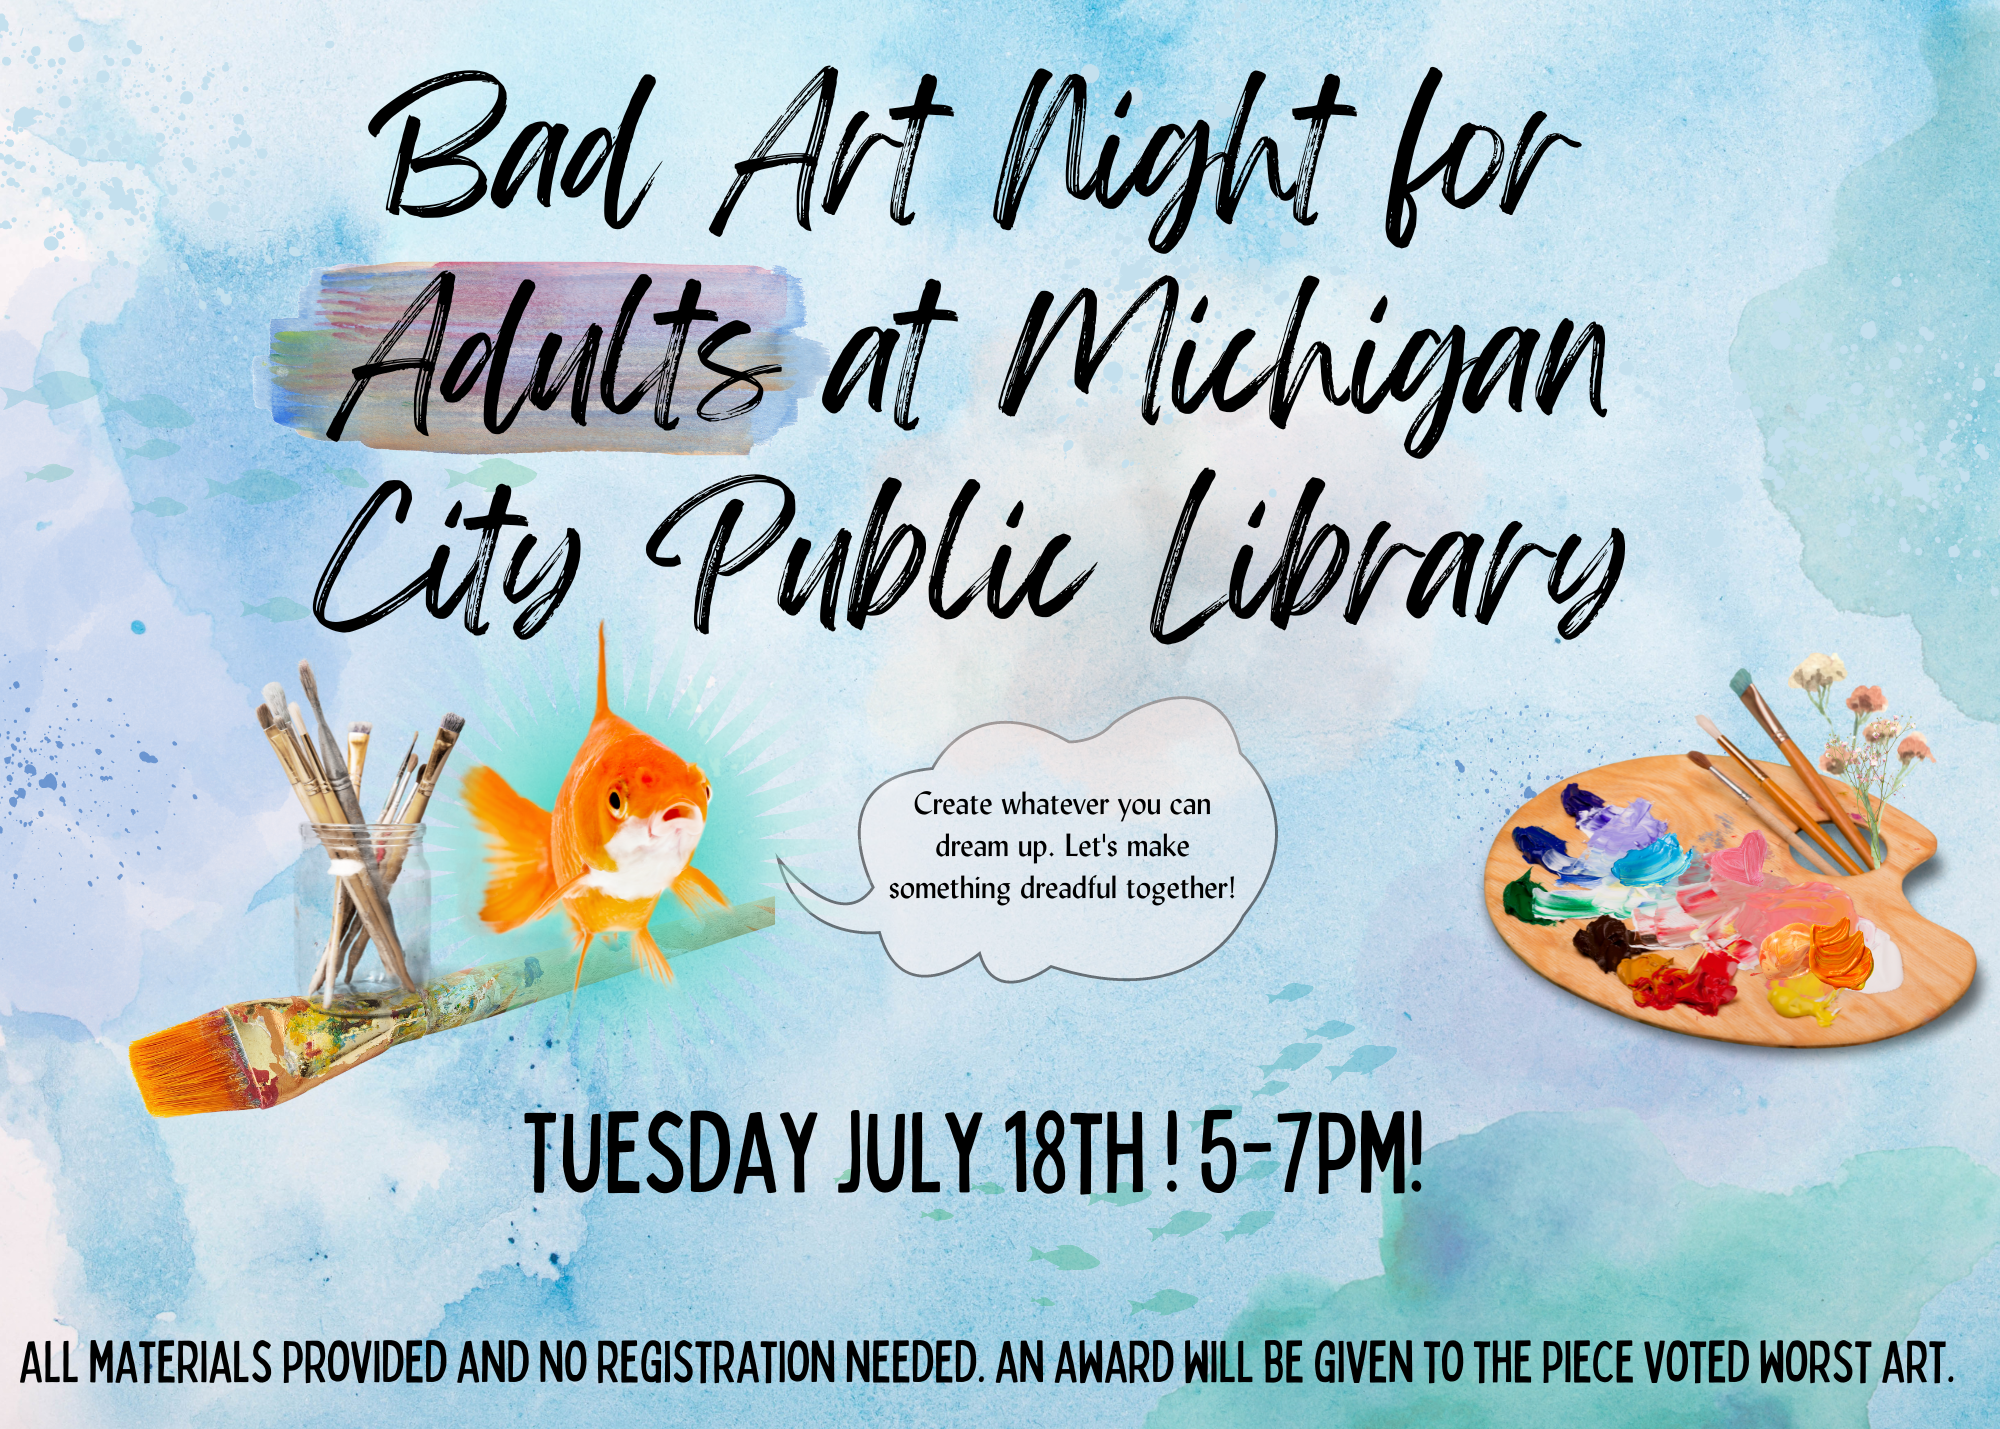 Bad Art for Adults - Michigan City Public Library